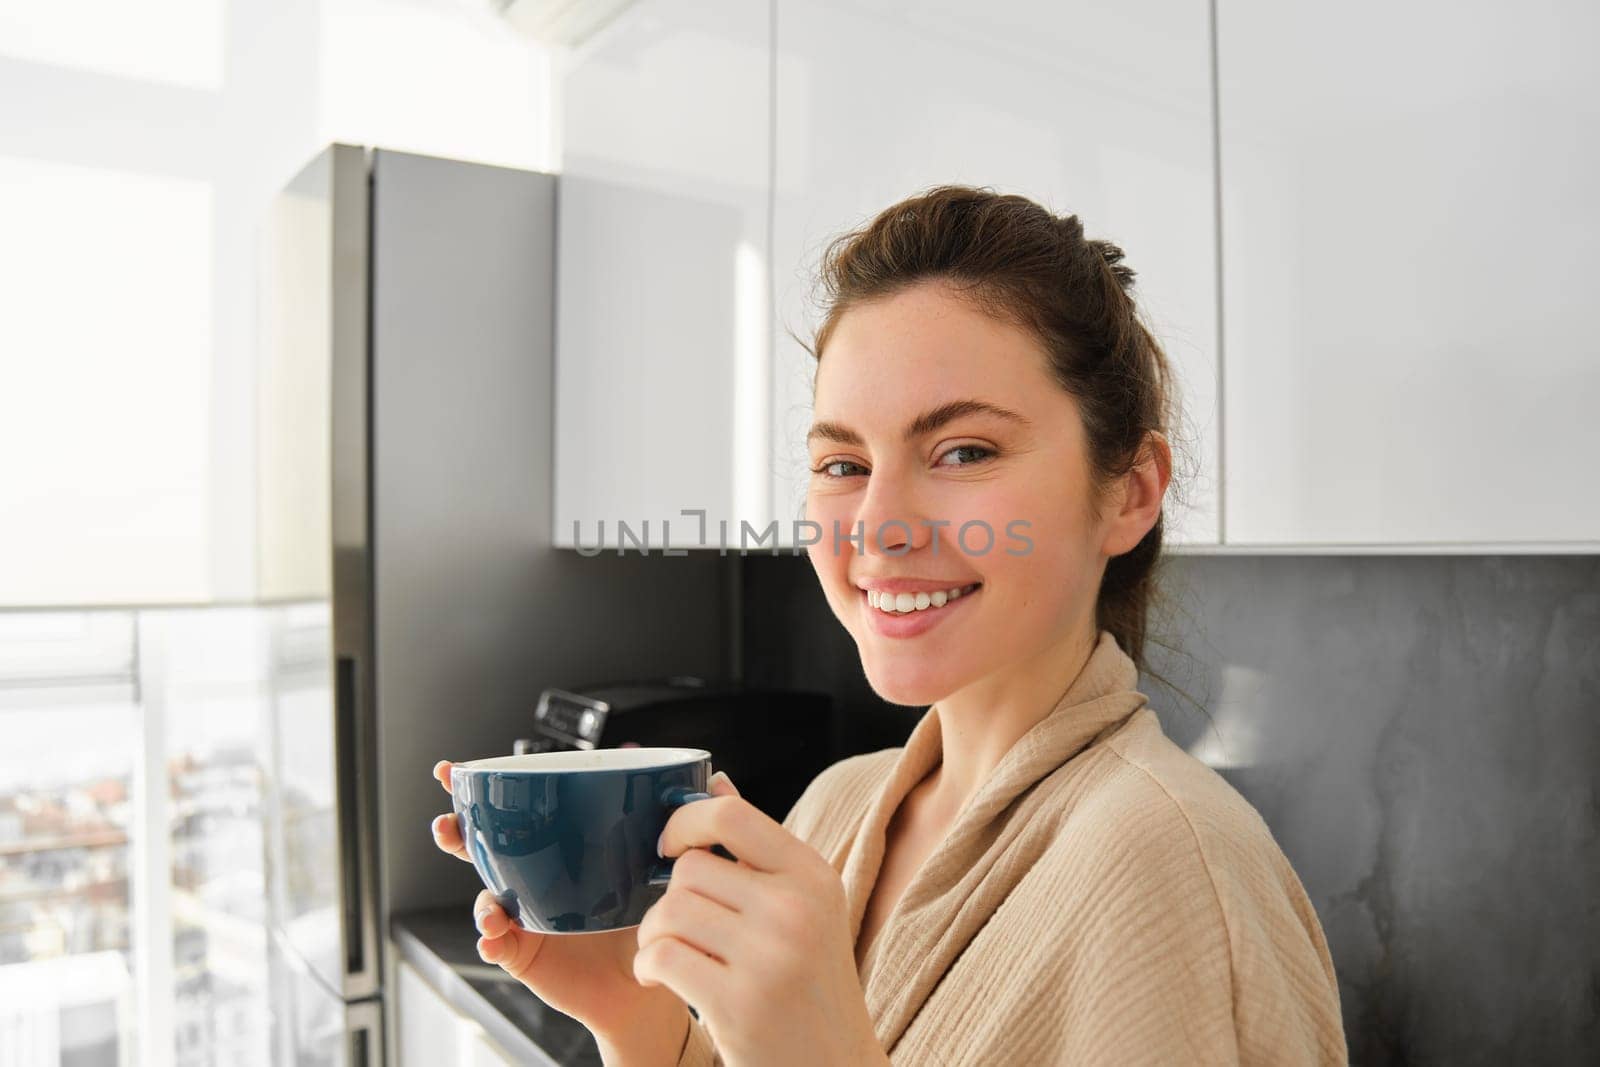 Daily routine and lifestyle. Young beautiful woman in bathrobe, standing in kitchen with cup of coffee, drinking tea, smiling and looking happy.